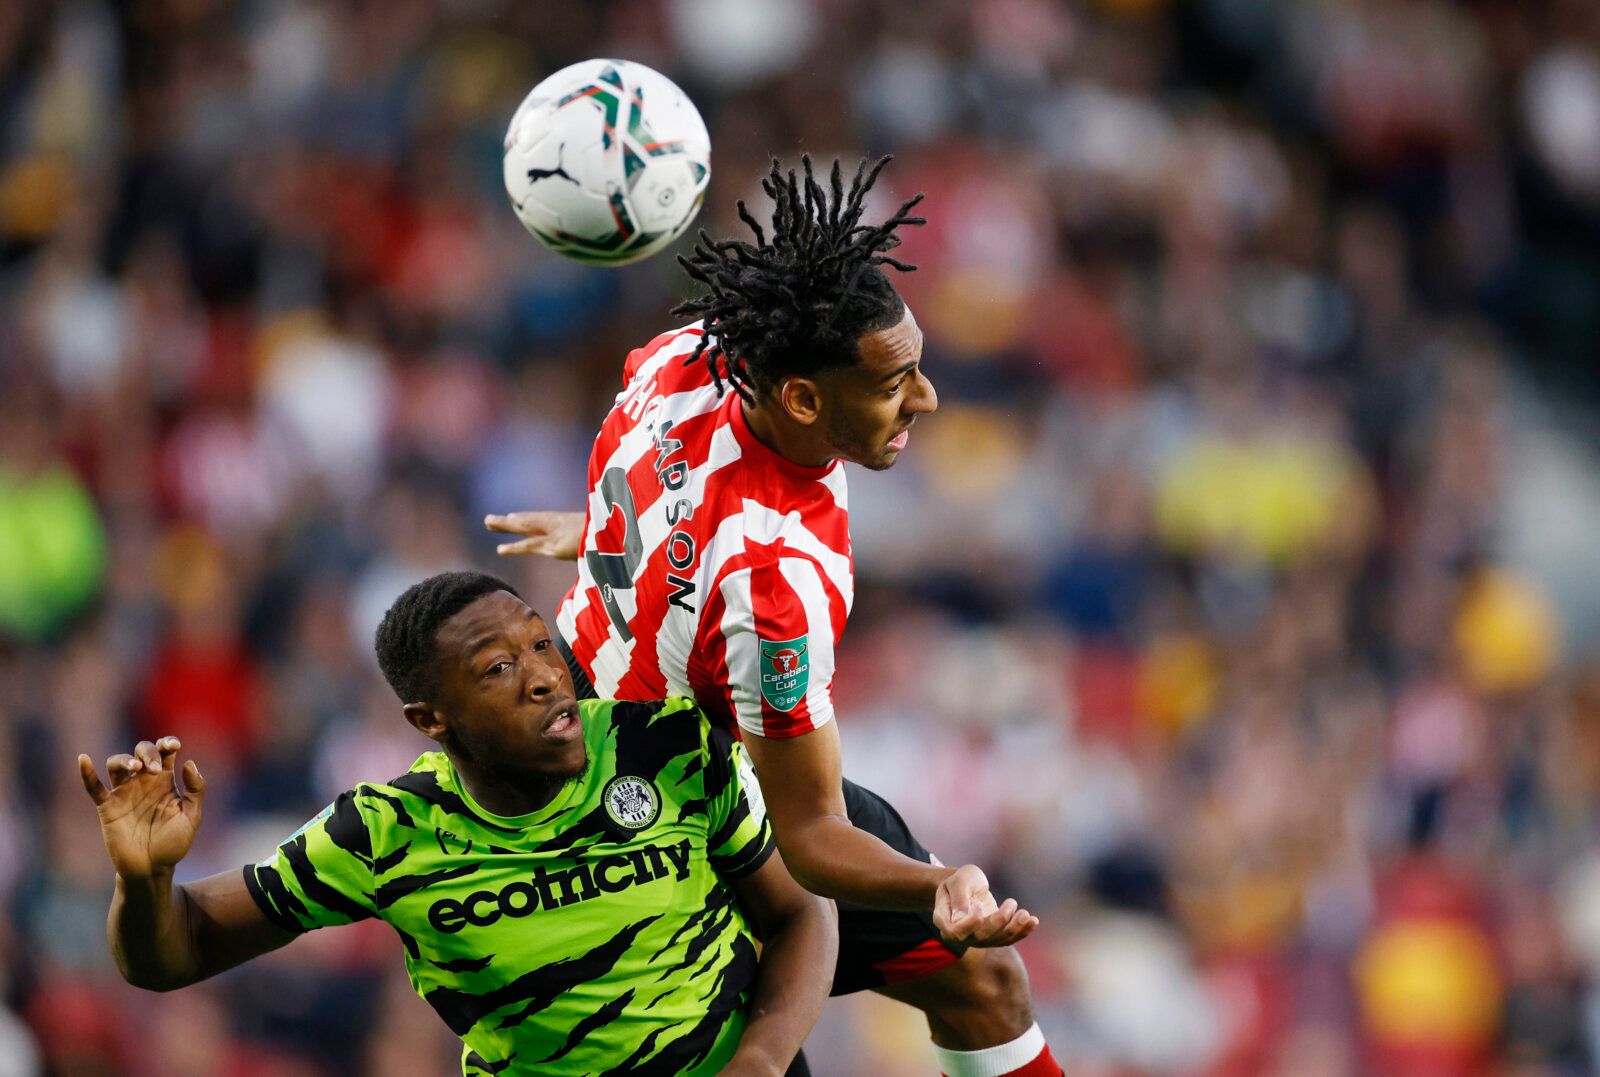 Soccer - England - Carabao Cup Second Round - Brentford v Forest Green Rovers - Community Stadium, London, Britain - August 24, 2021  Brentford's Dominic Thompson in action with Forest Green Rovers' Ebou Adams Action Images via Reuters/John Sibley